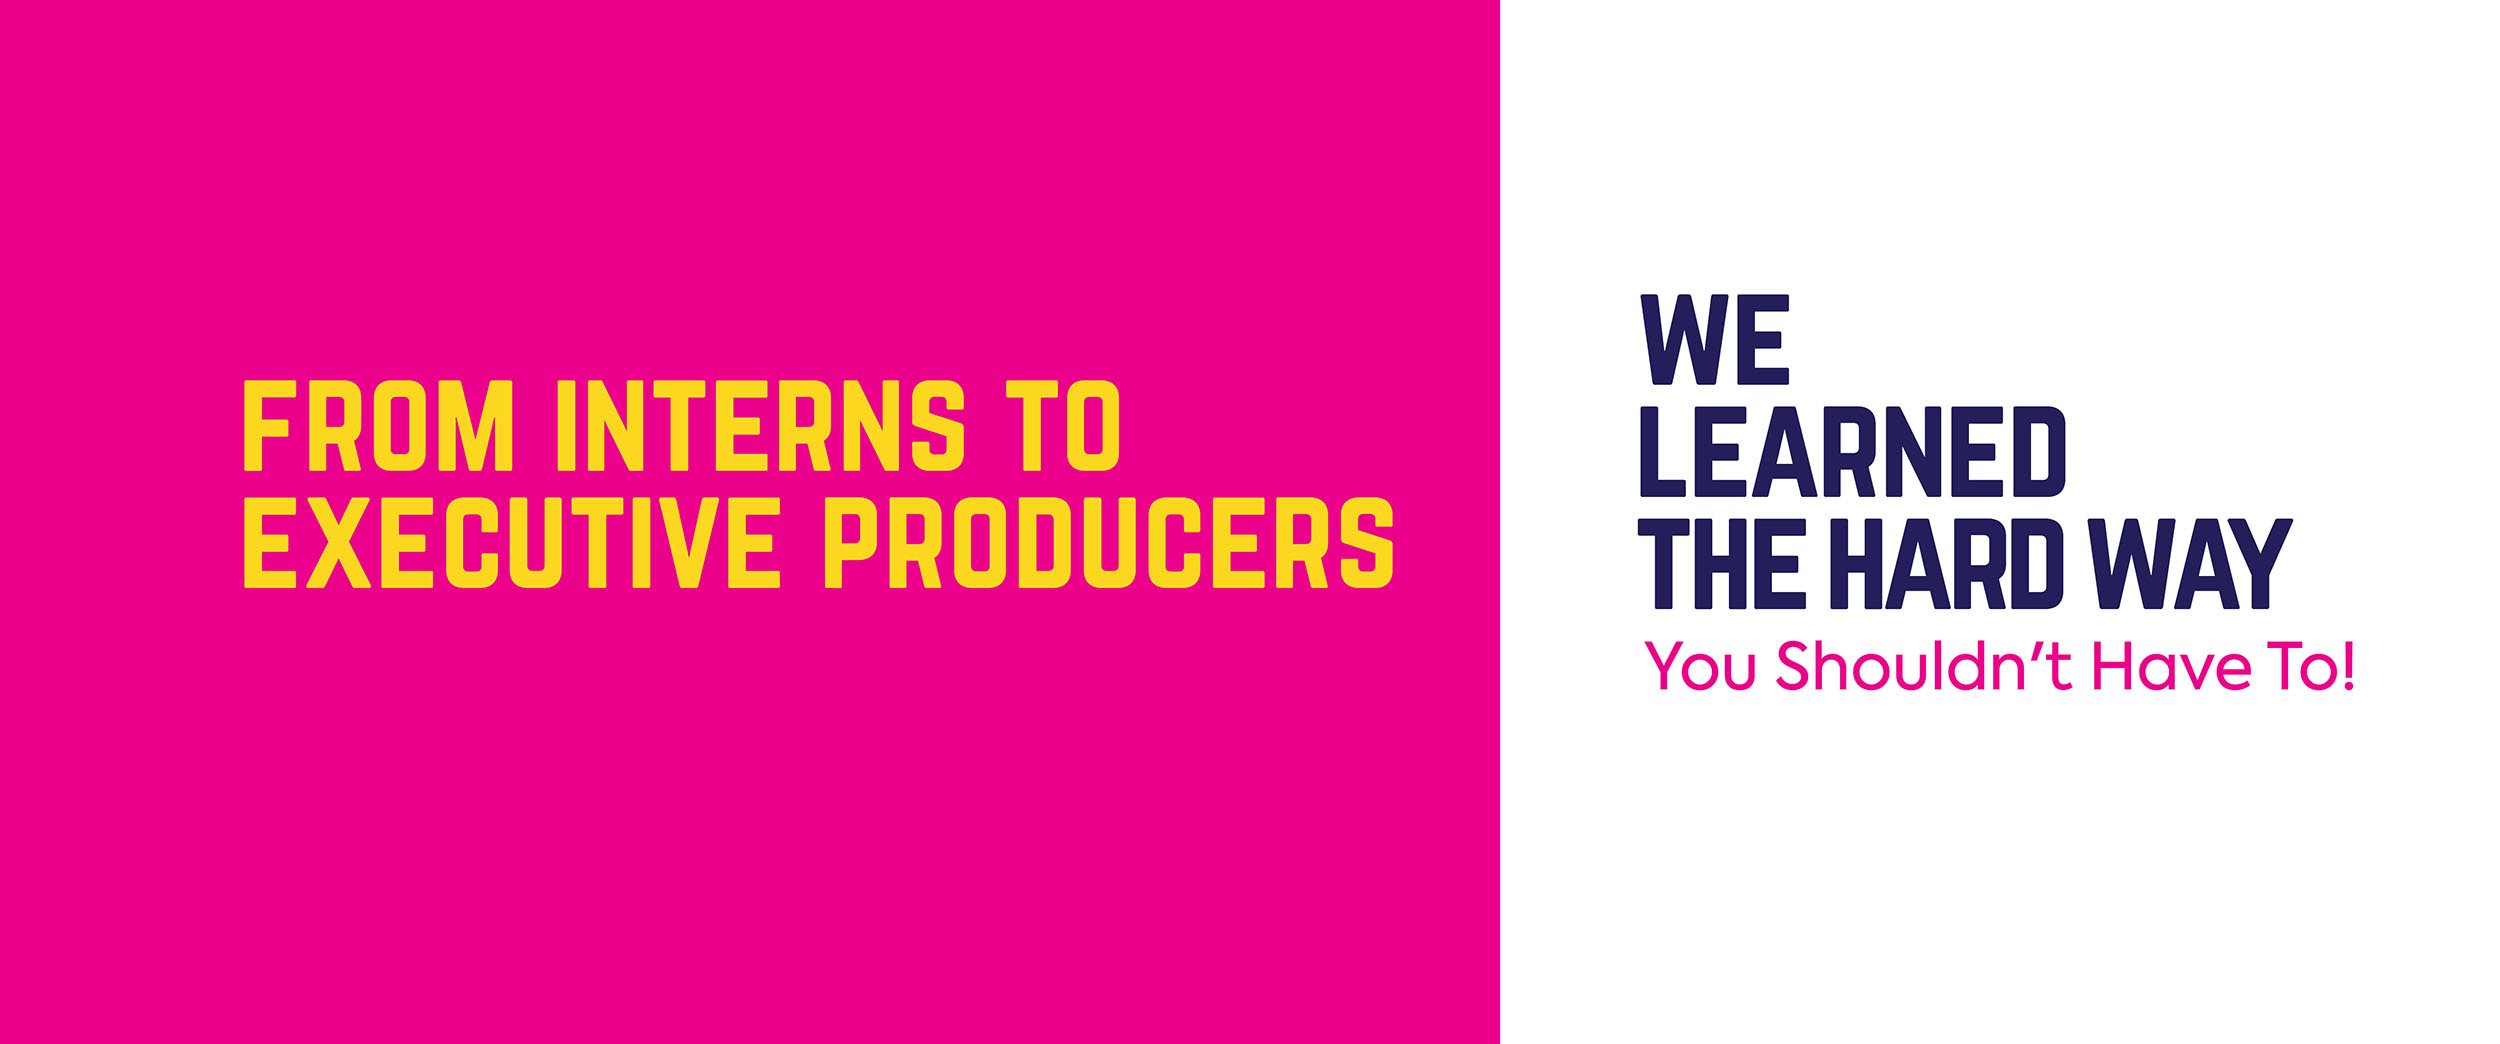 From Interns To Executive Producers - We learned the hard way. You shouldn't have to!